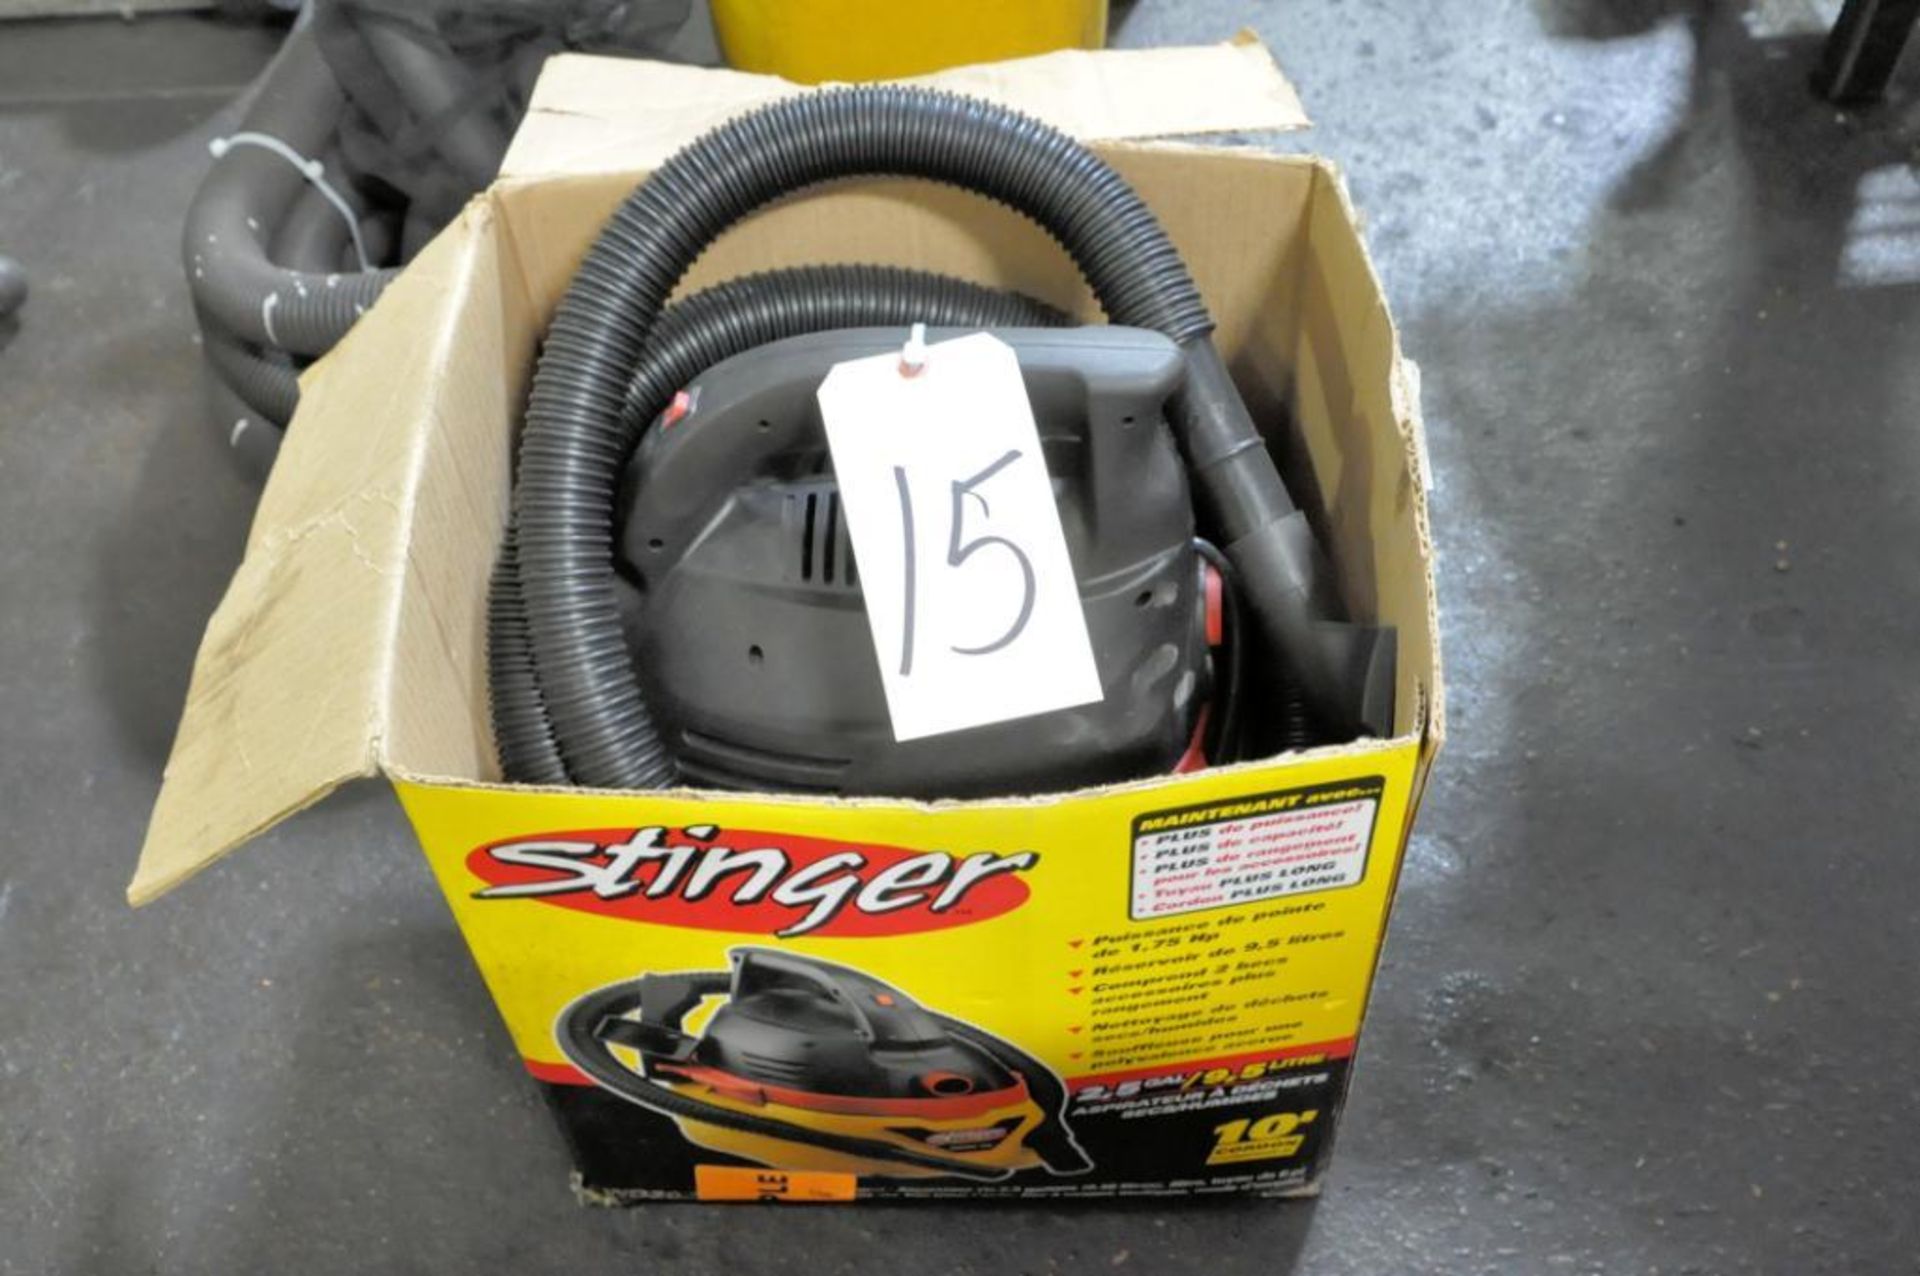 Stinger 1 3/4-HP Portable Shop Vac with Attachments